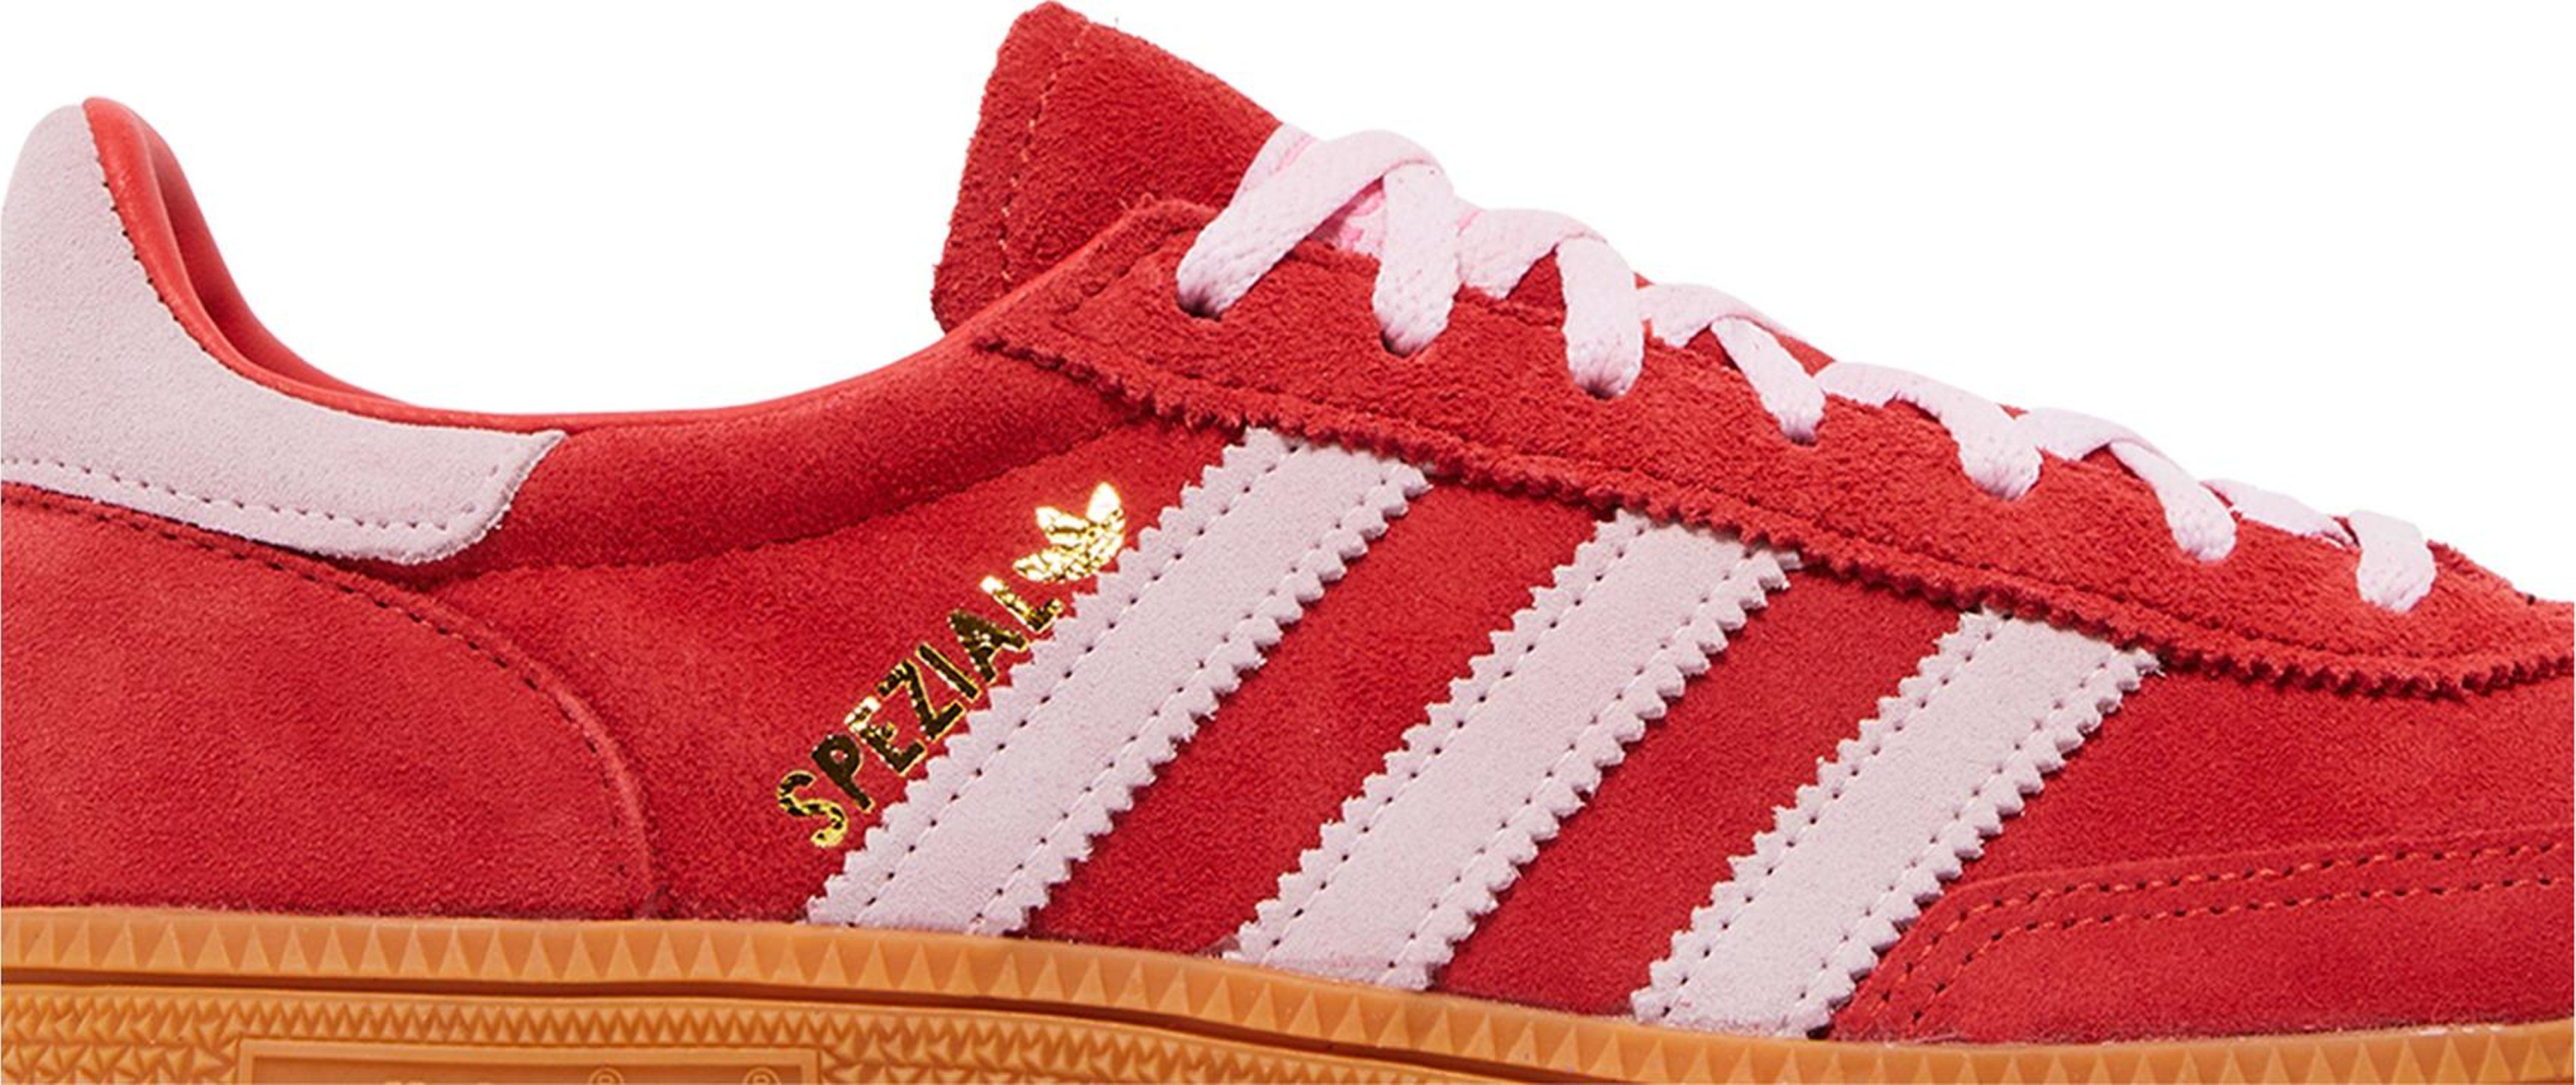 Buy Wmns Handball Spezial 'Bright Red Clear Pink' - IE5894 | GOAT | GOAT